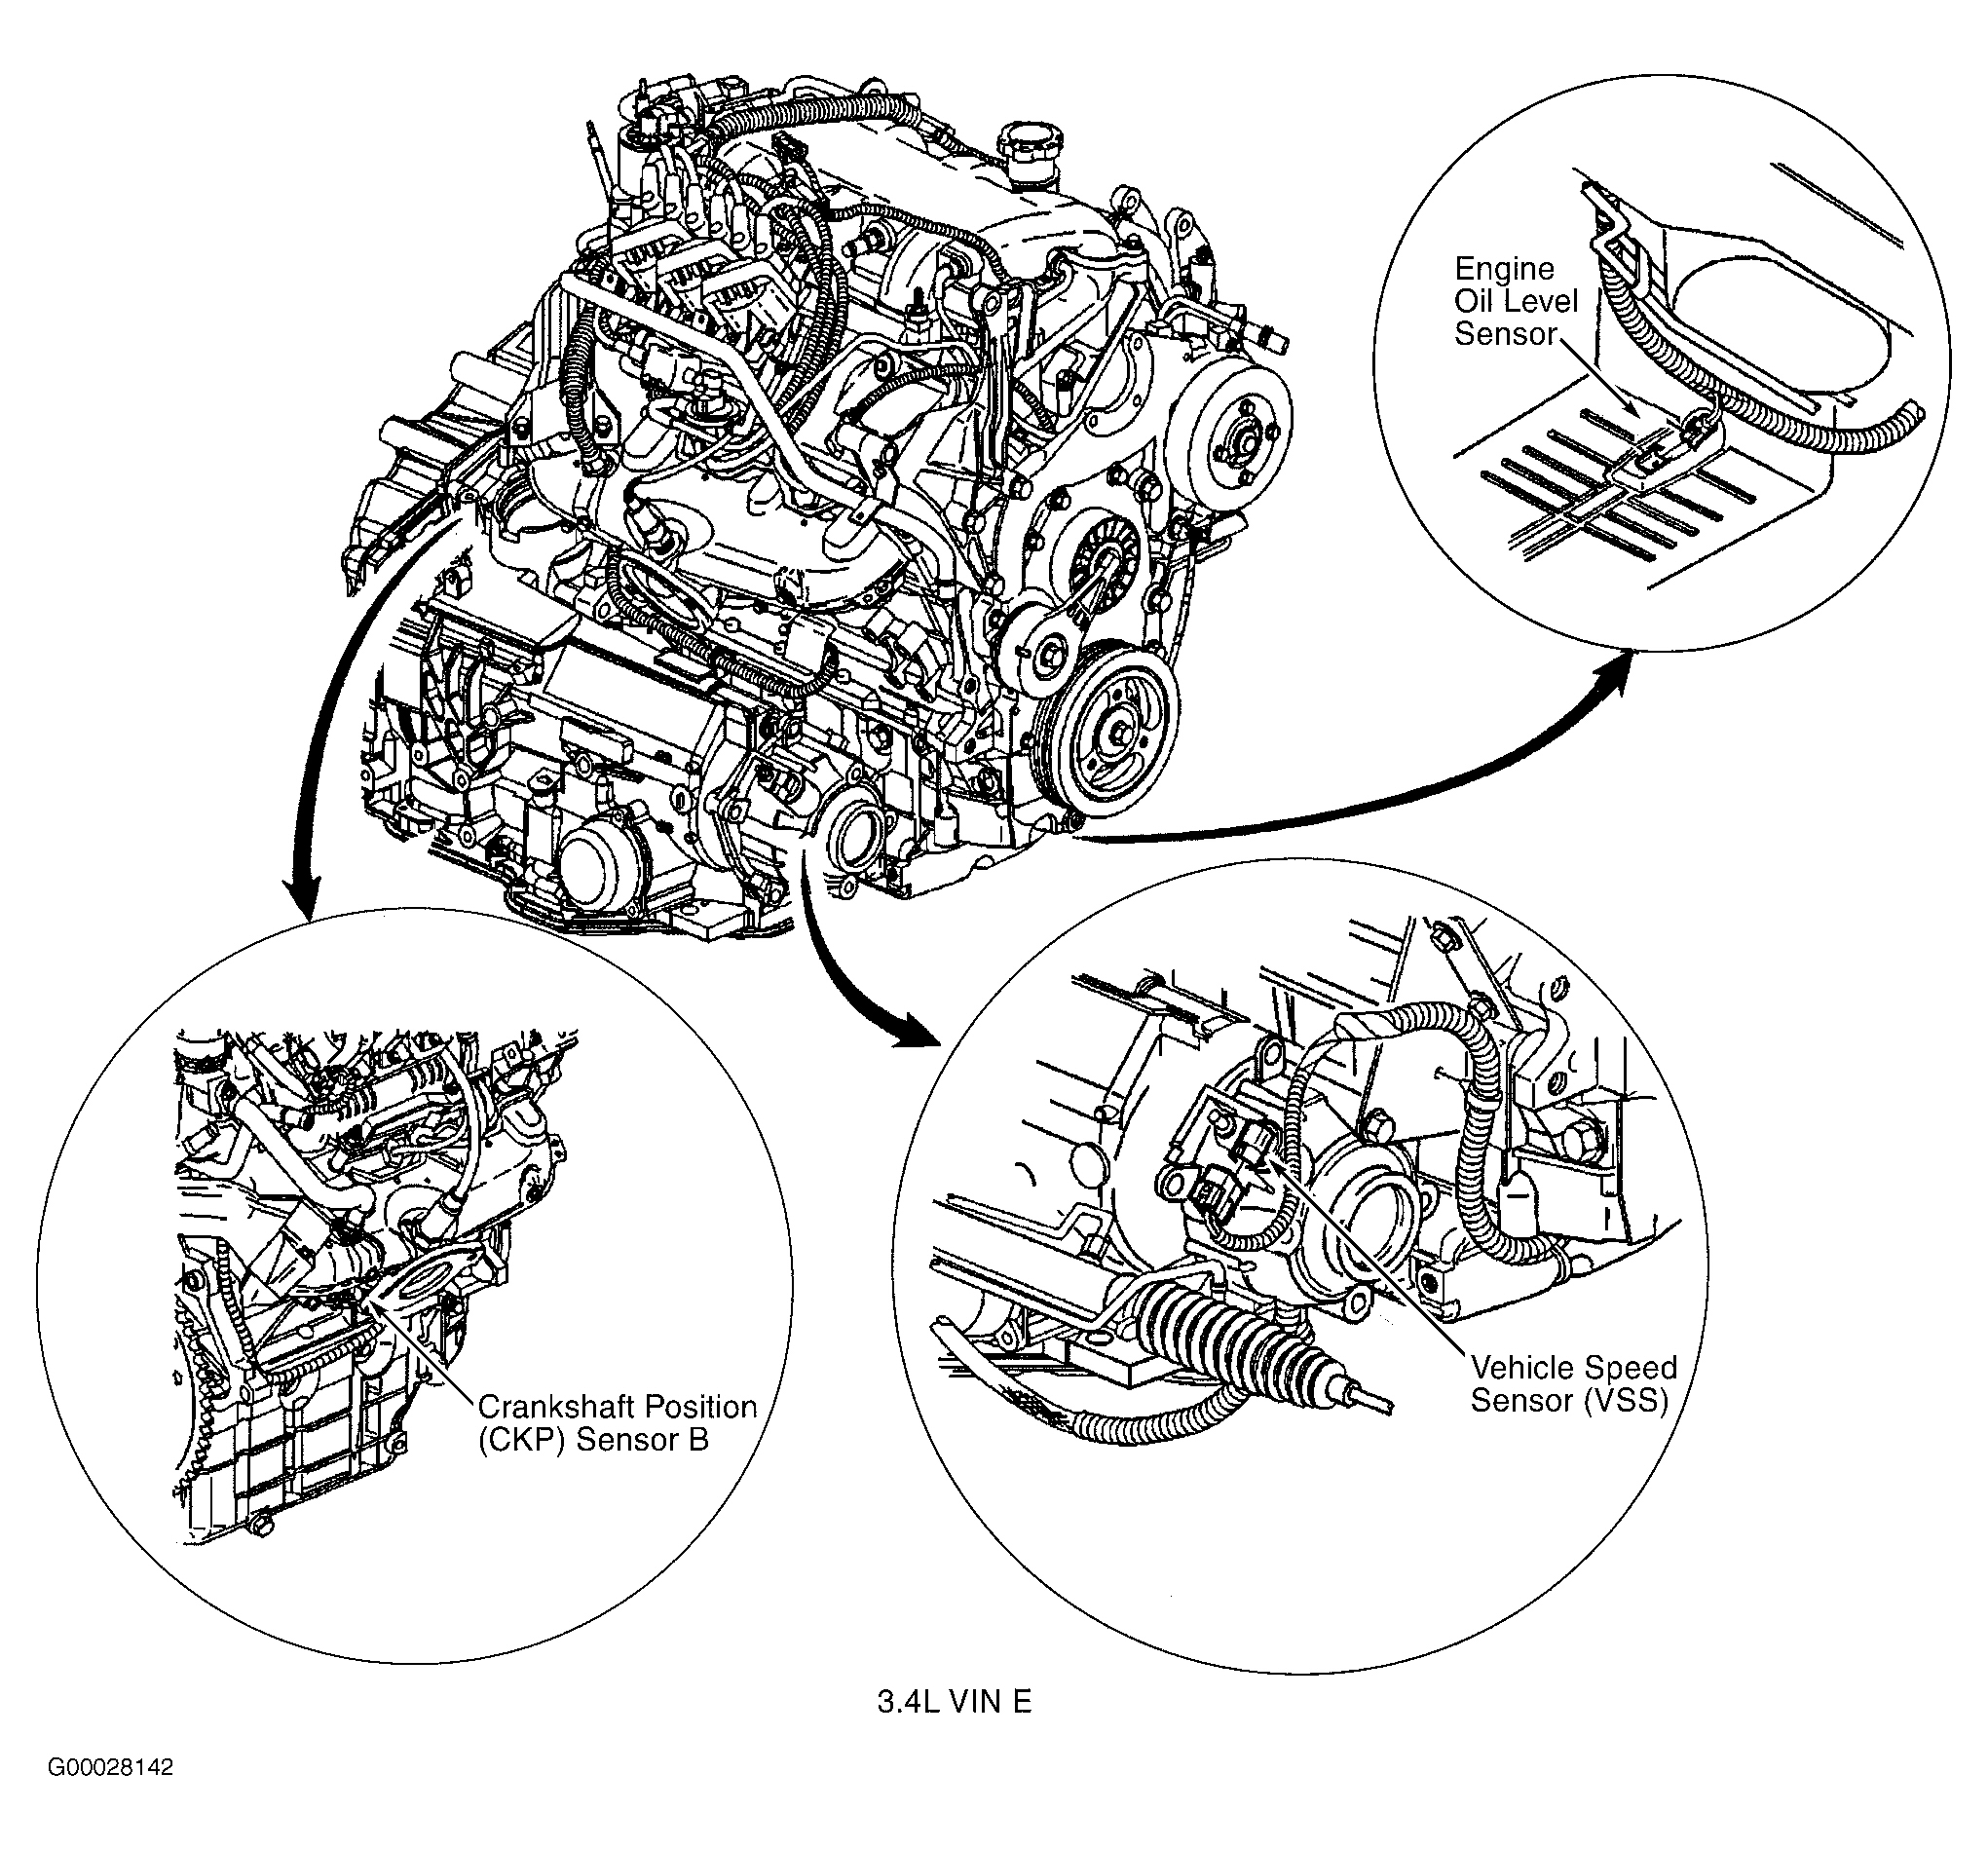 Chevrolet Monte Carlo SS 2002 - Component Locations -  Right Side Of Engine (3.4L VIN E)